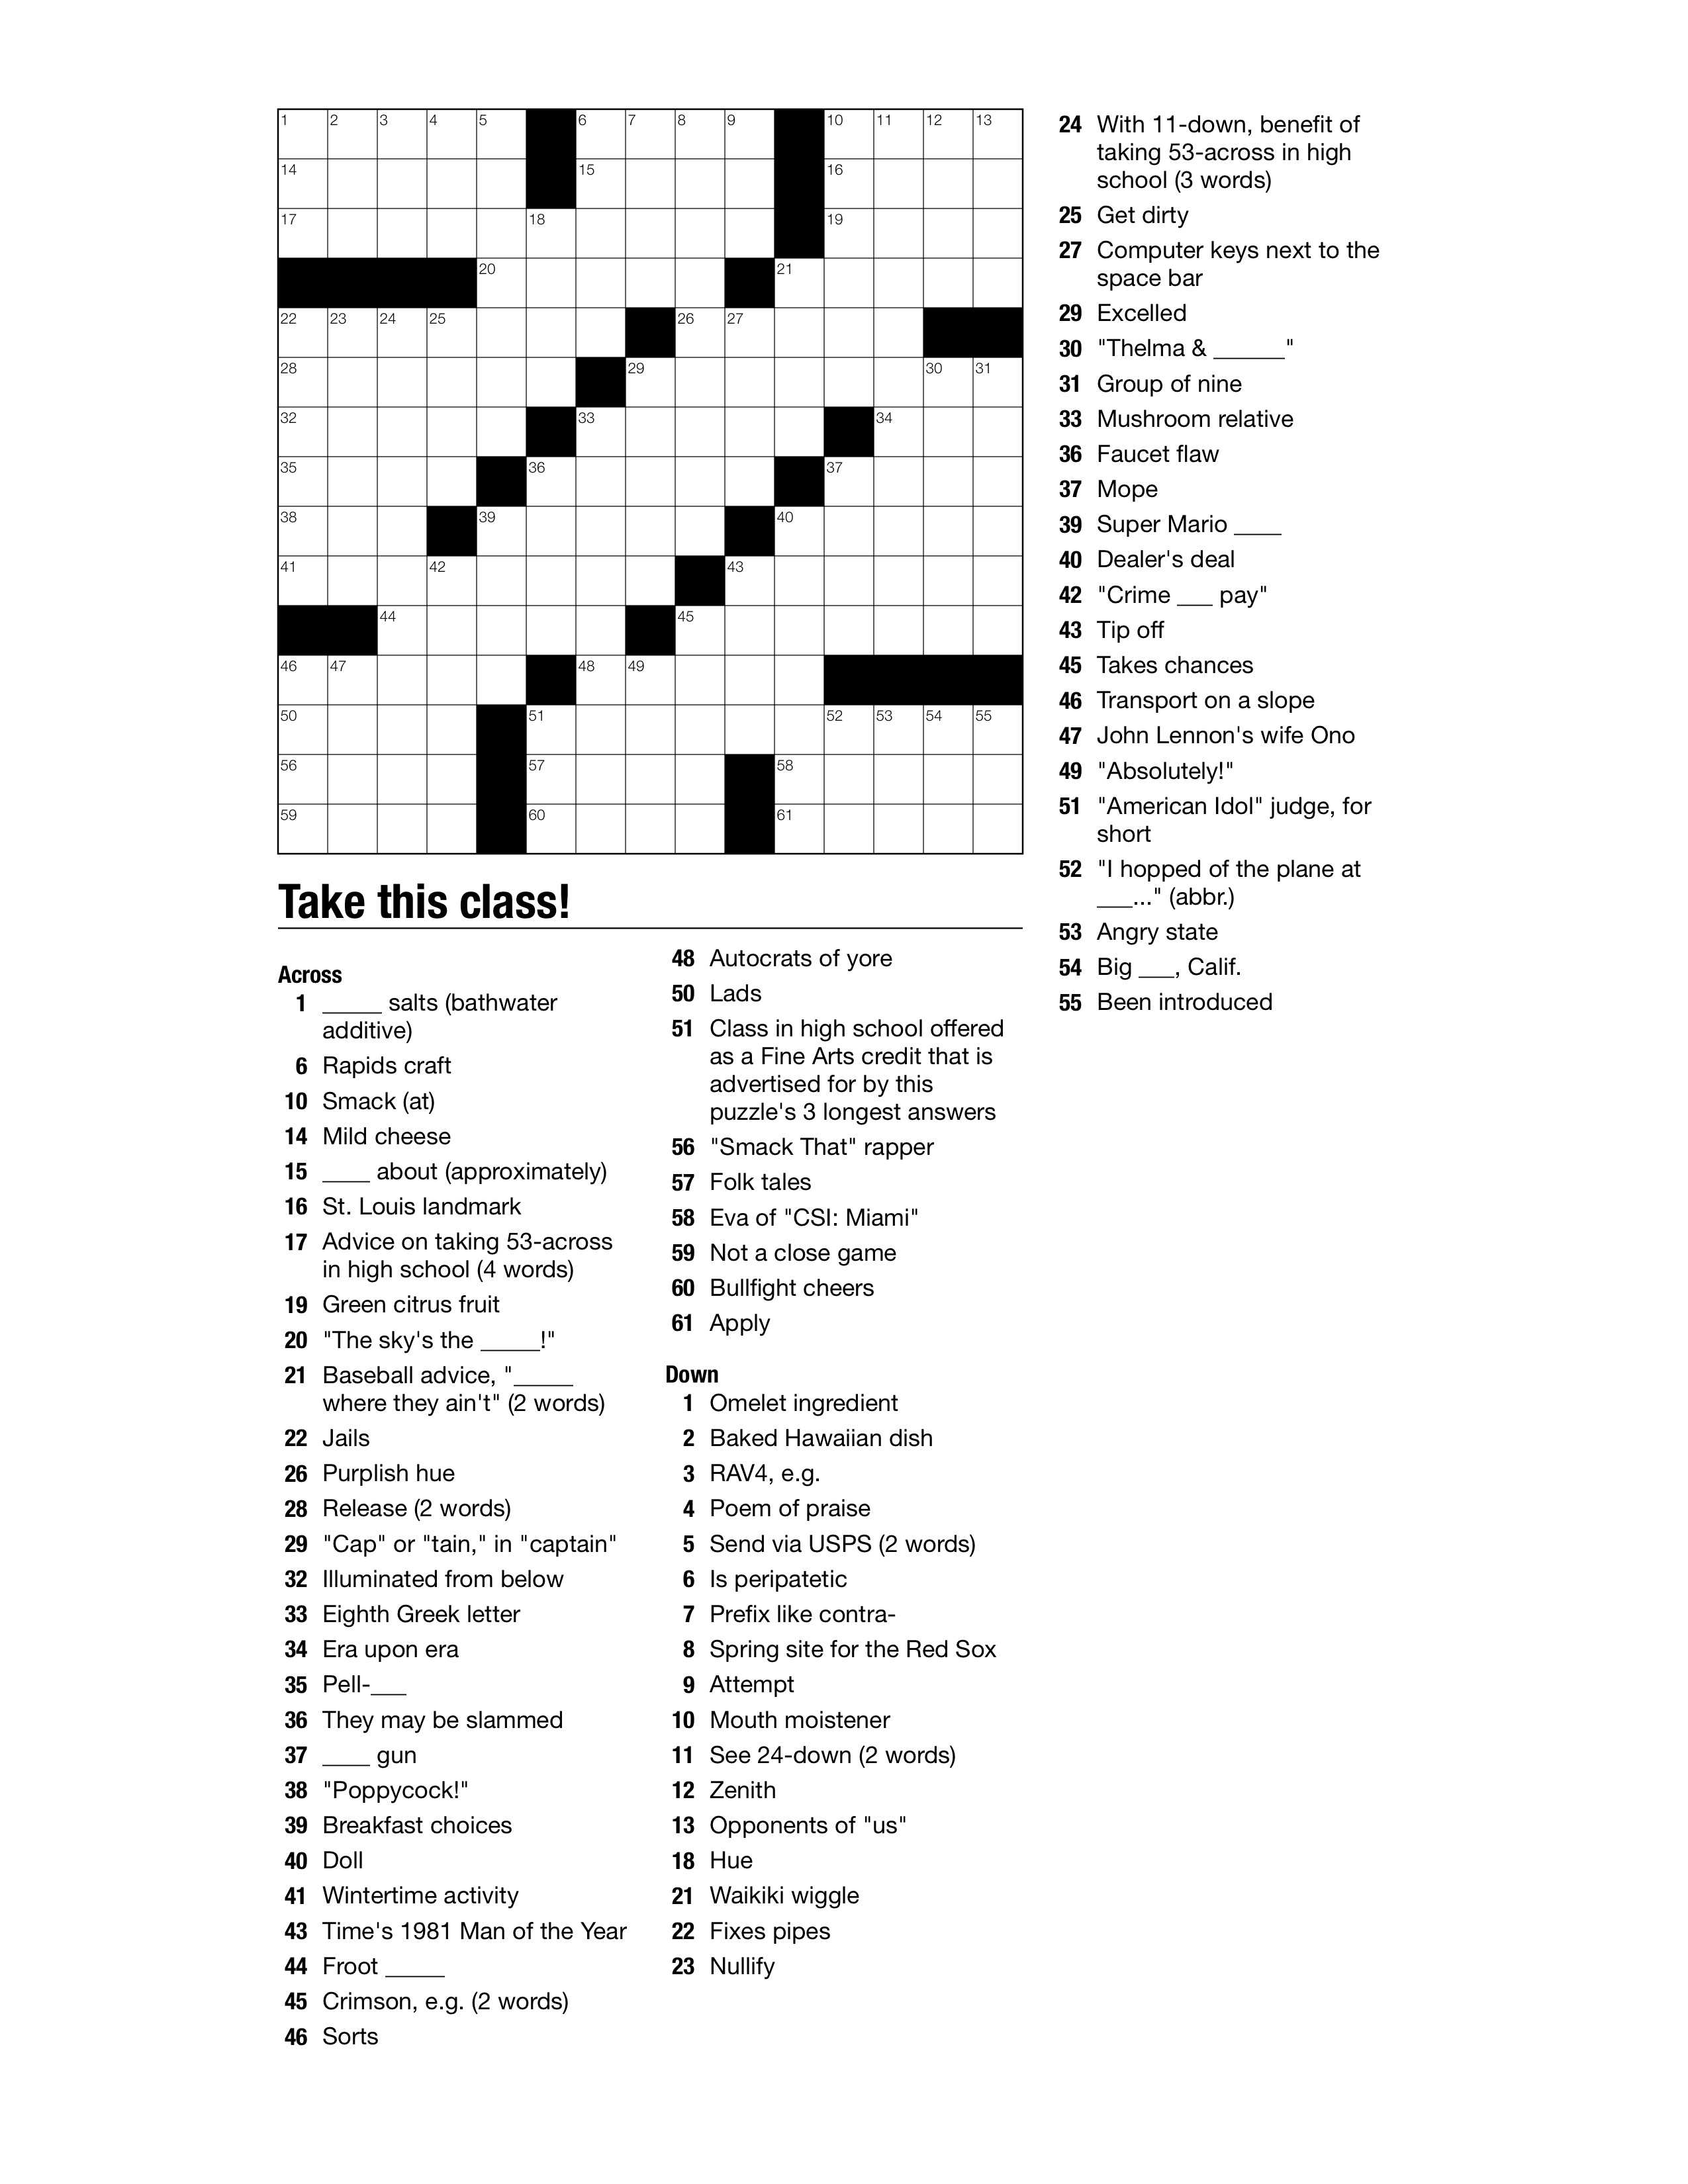 free crossword puzzles daily themed crossword